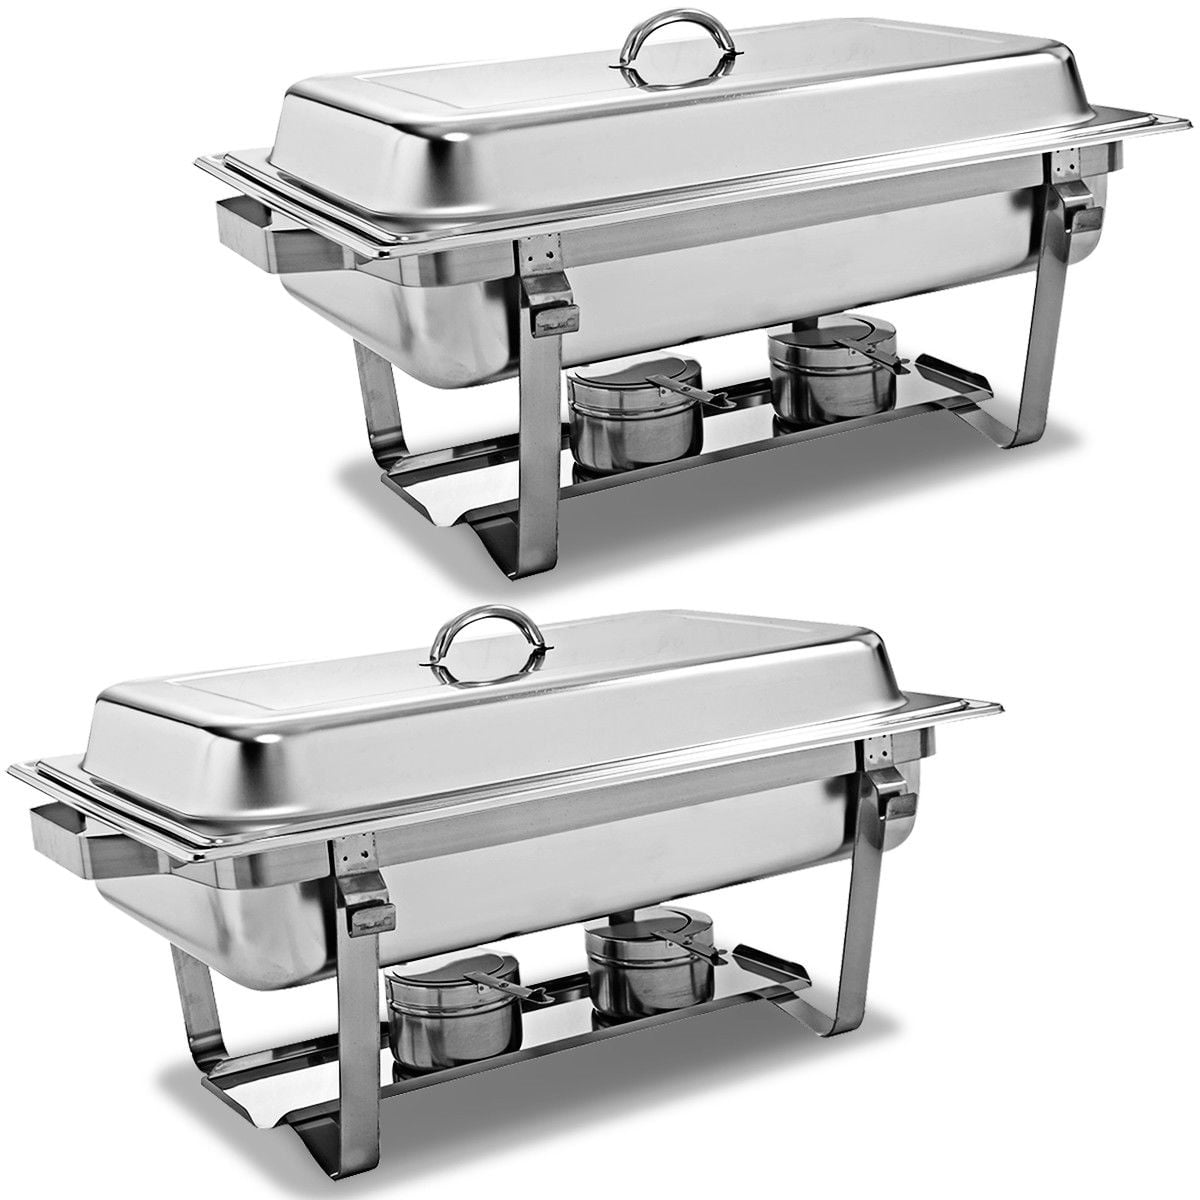 Details about   Steel Stainless Chafing Dish Catering Buffet 2 Pcs Full Size Holds Various Food 